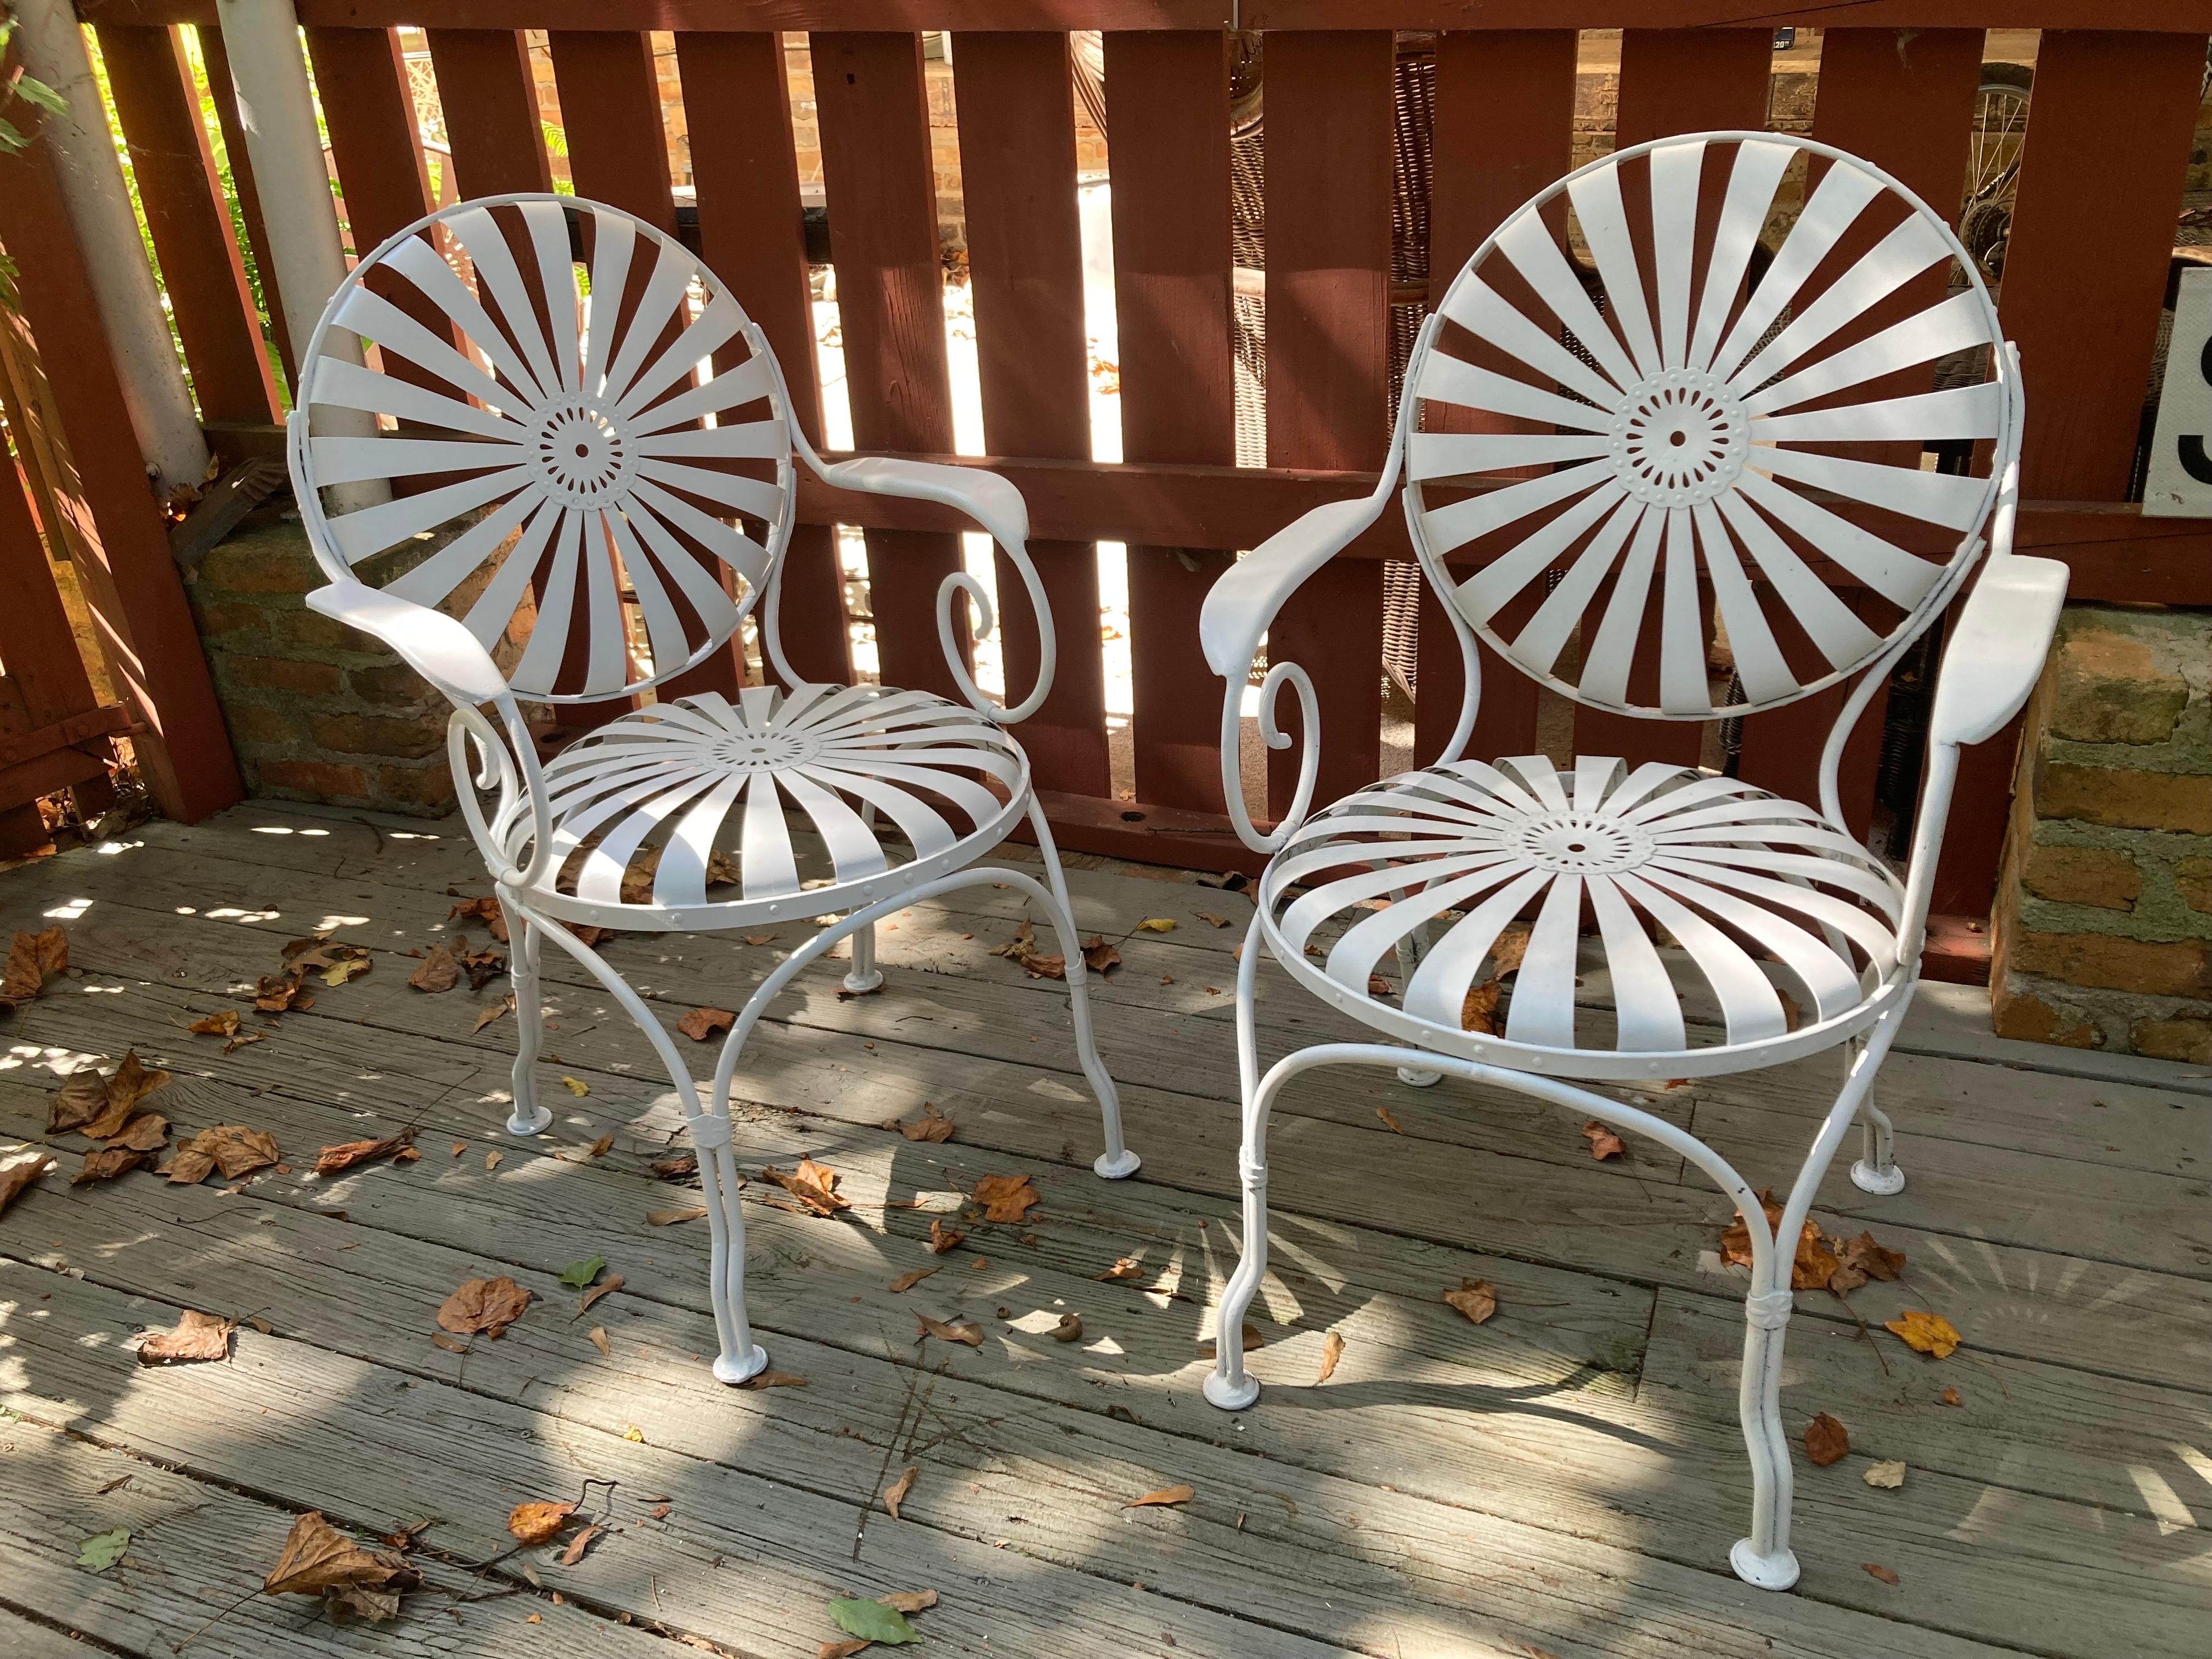 
spring steel chair, pinwheel design
no maker’s mark
multiple sets available
seat to floor is 17

23 by 24 by 34 tall

shipping from athens ga, 30606 